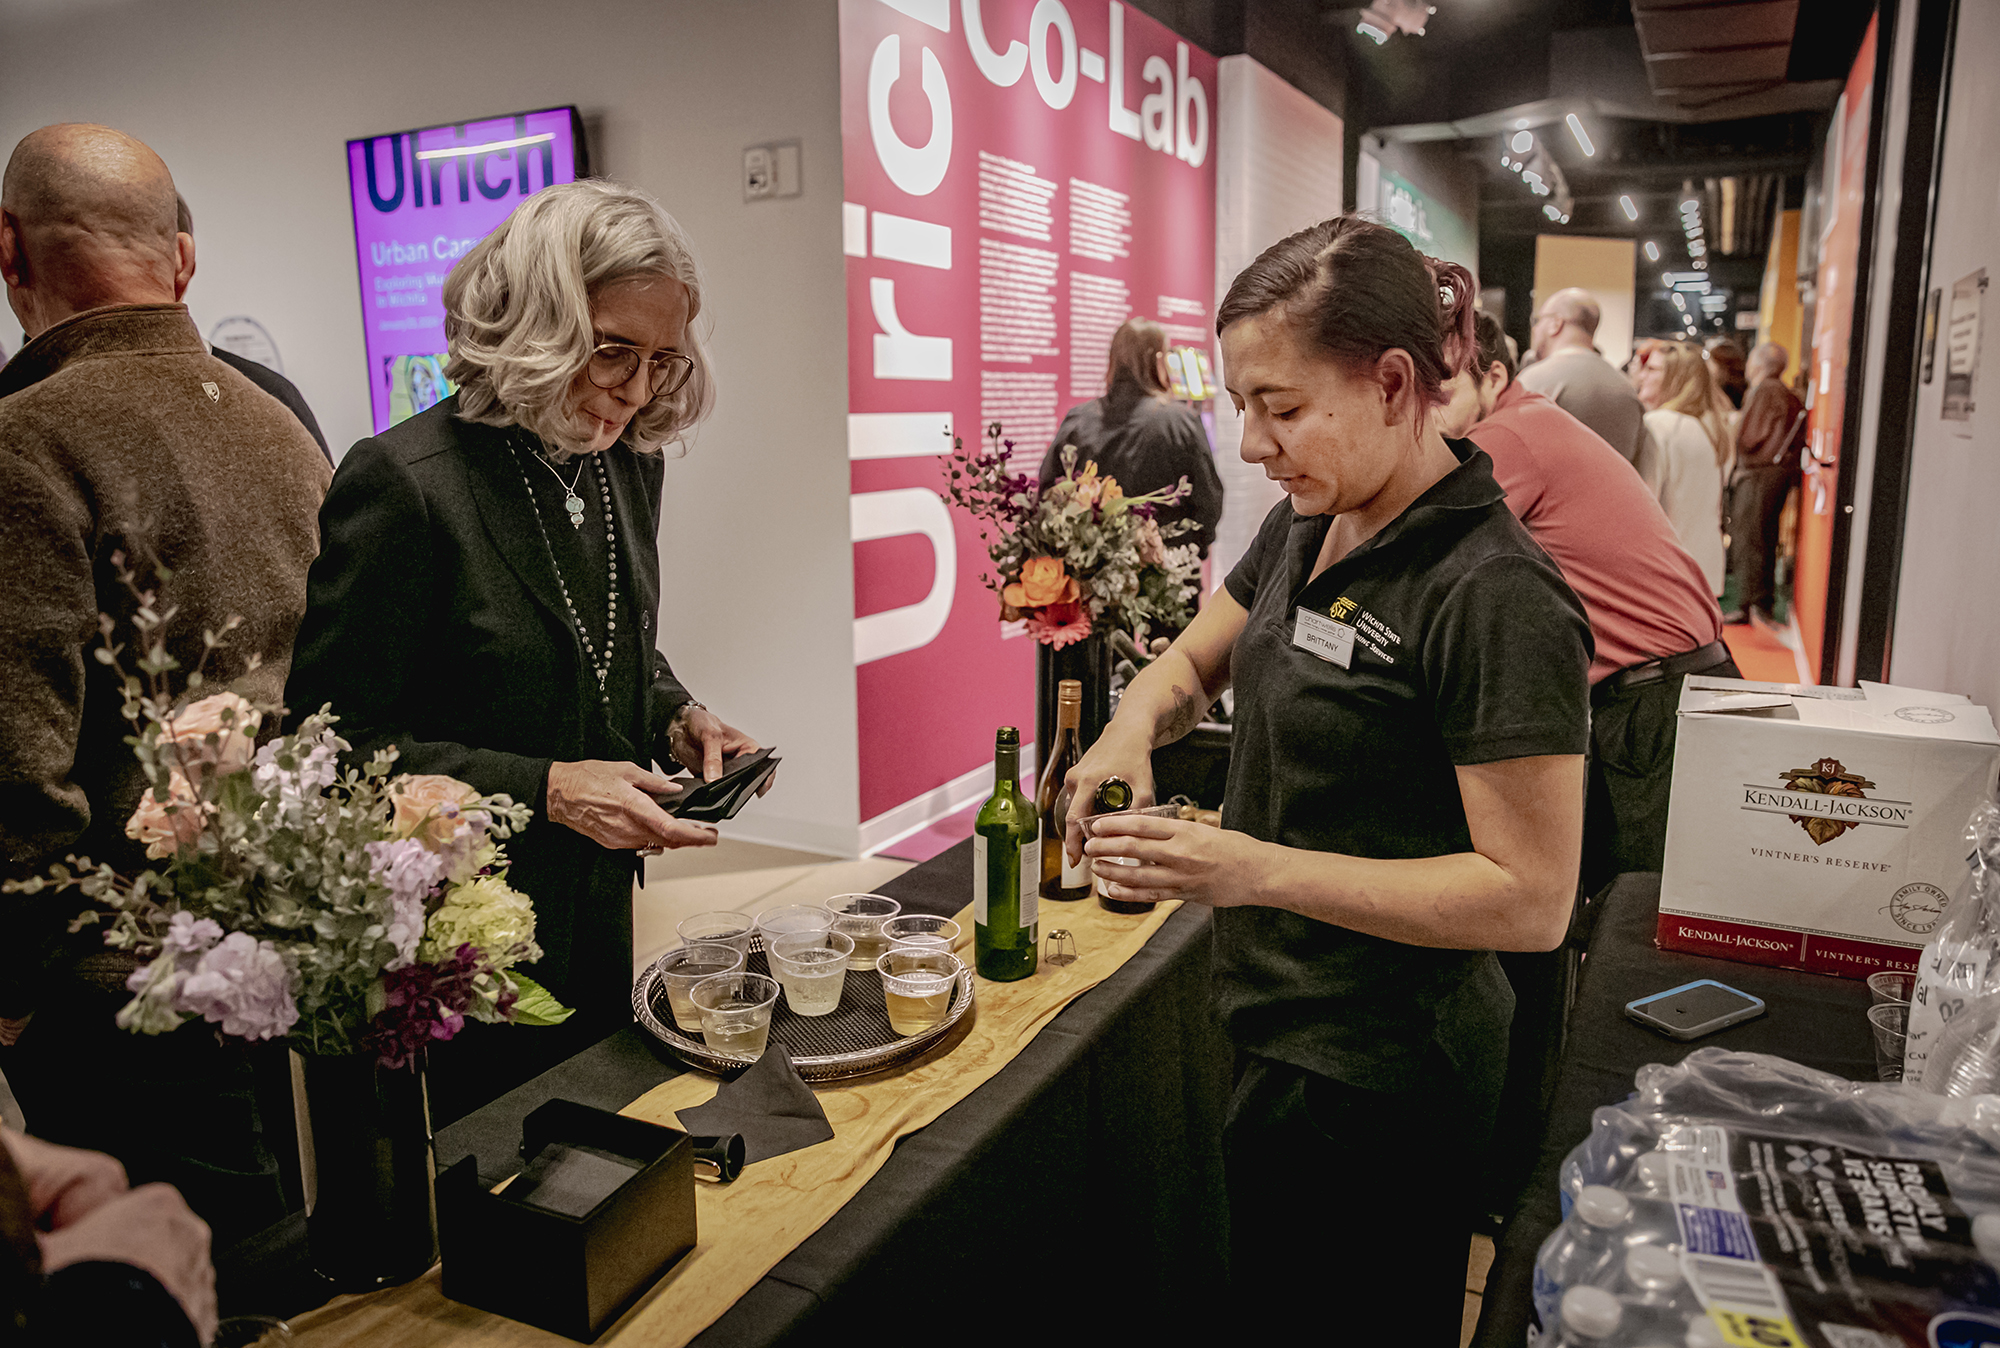 A woman prepares a drink for another woman in the lobby of the Ulrich.